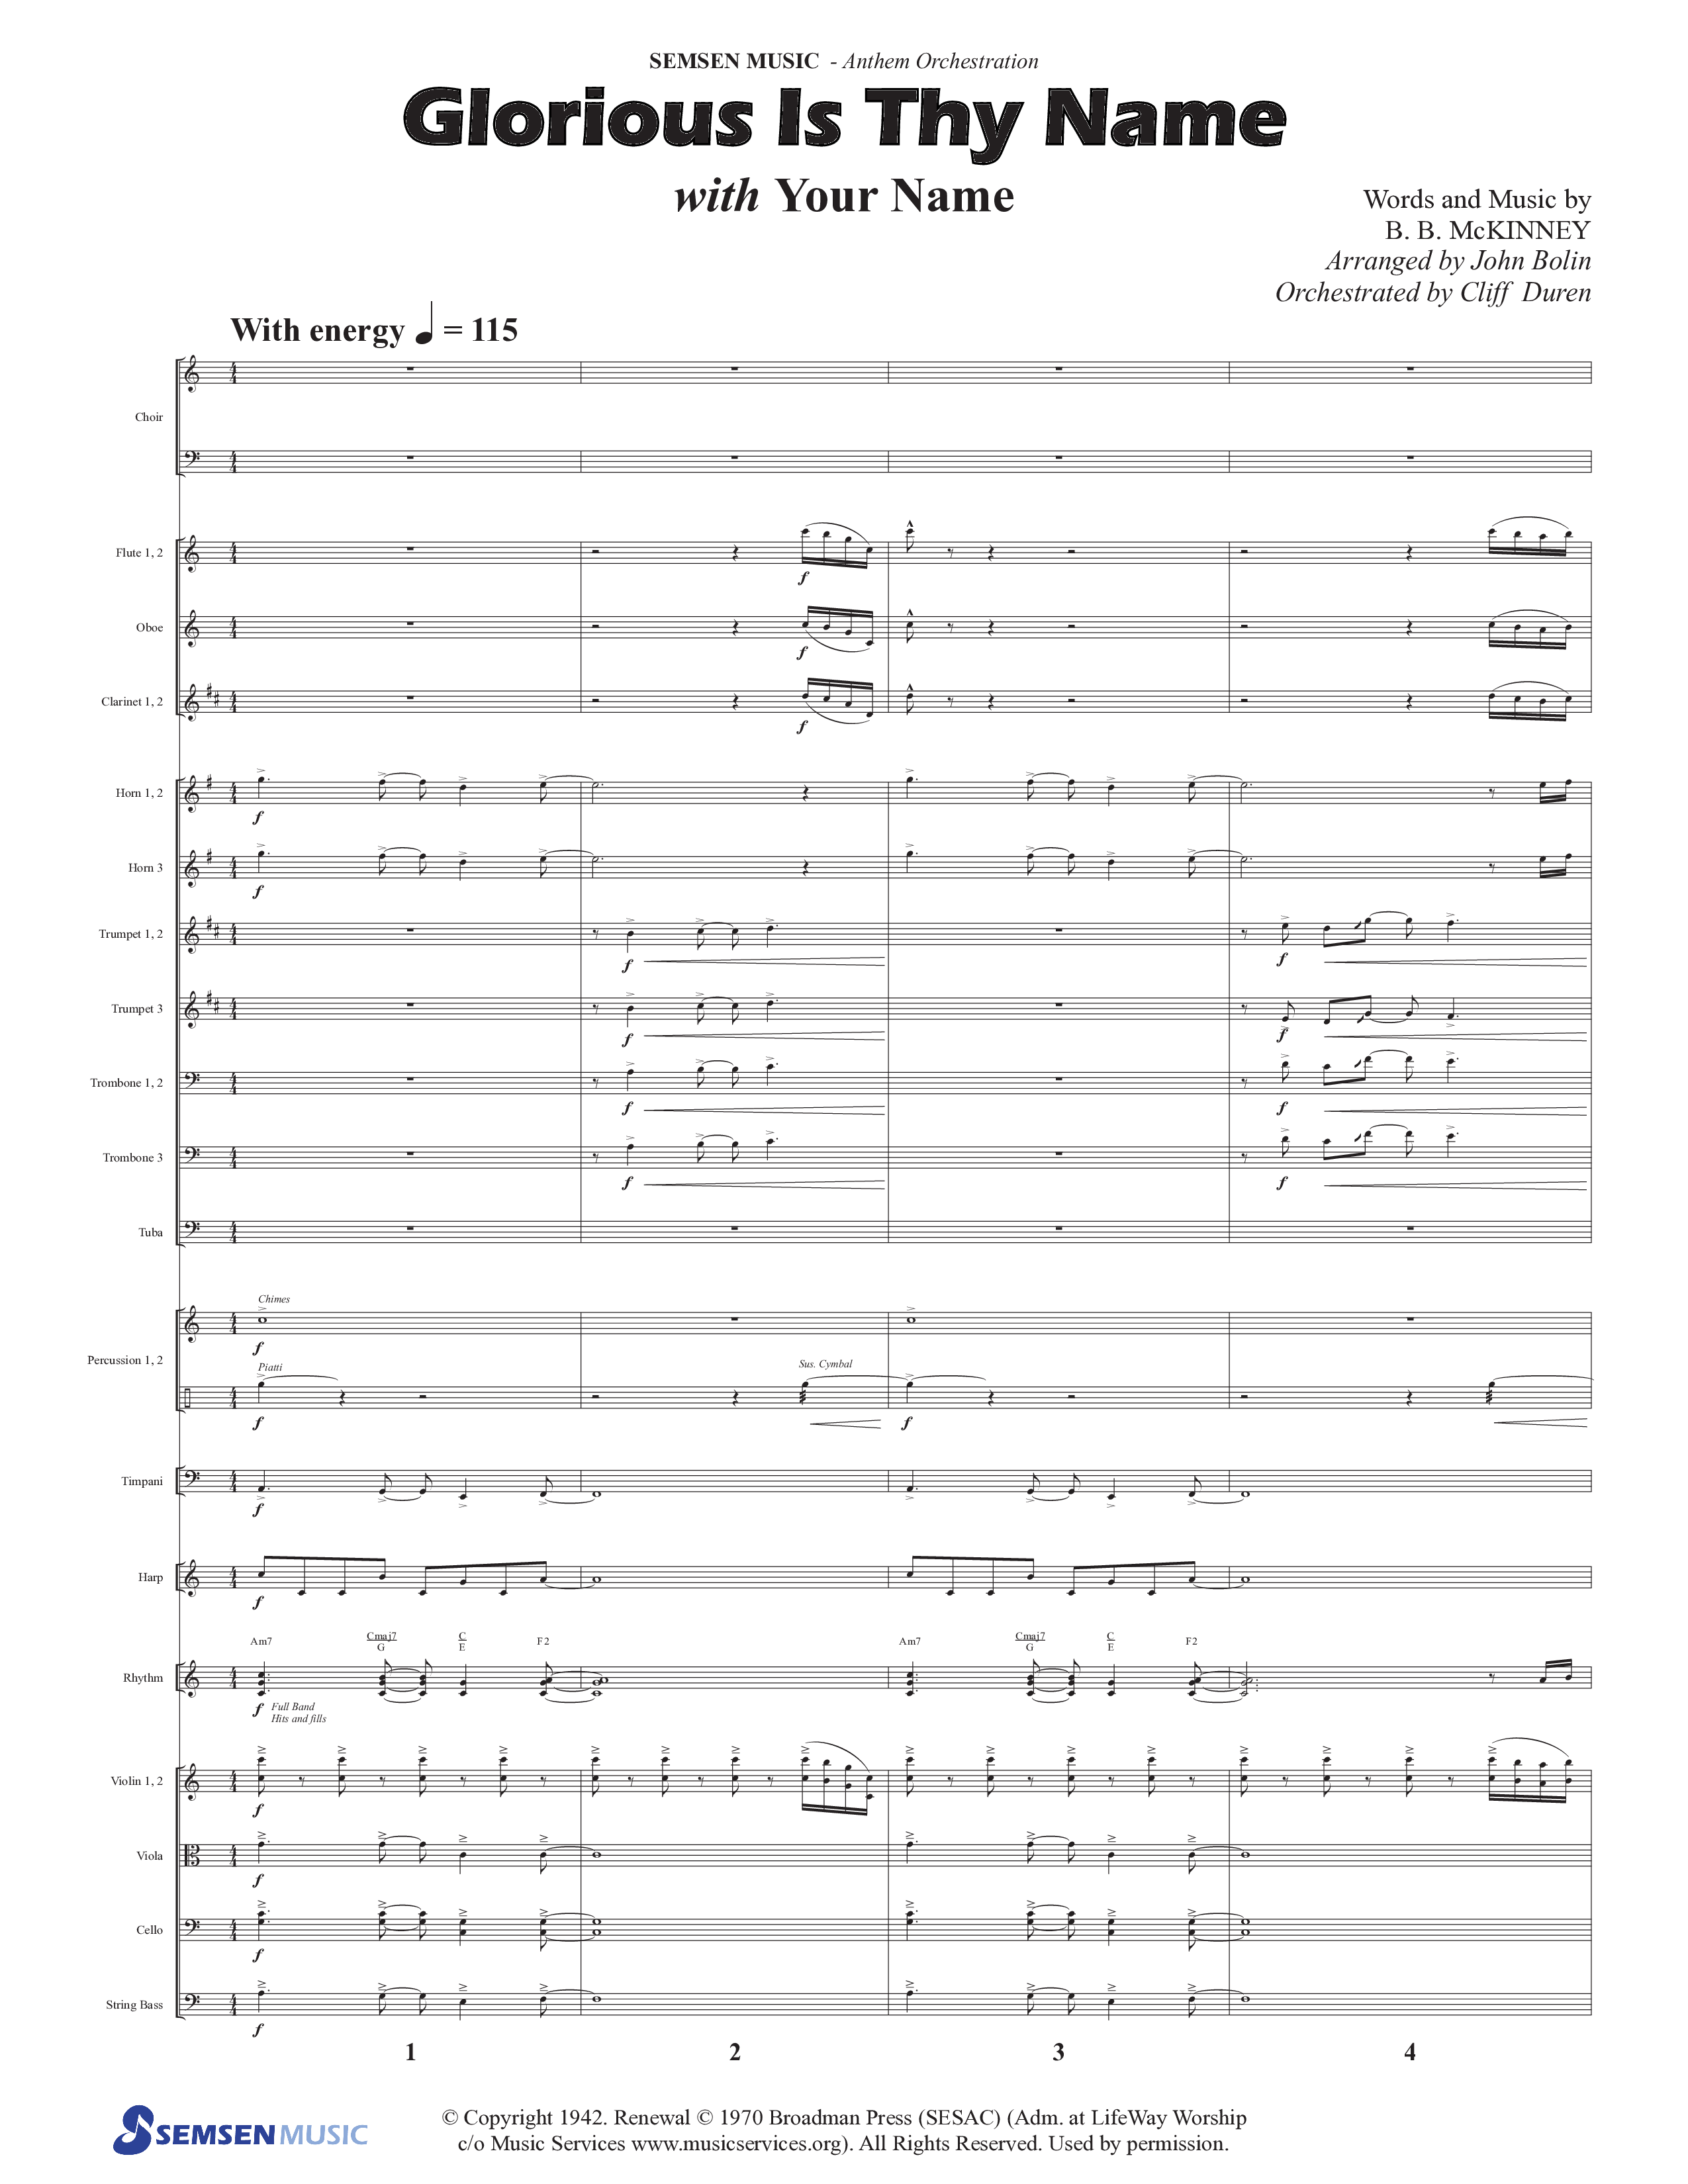 Glorious Is Thy Name (with Your Name) (Choral Anthem SATB) Conductor's Score (Semsen Music / Arr. John Bolin / Orch. Cliff Duren)